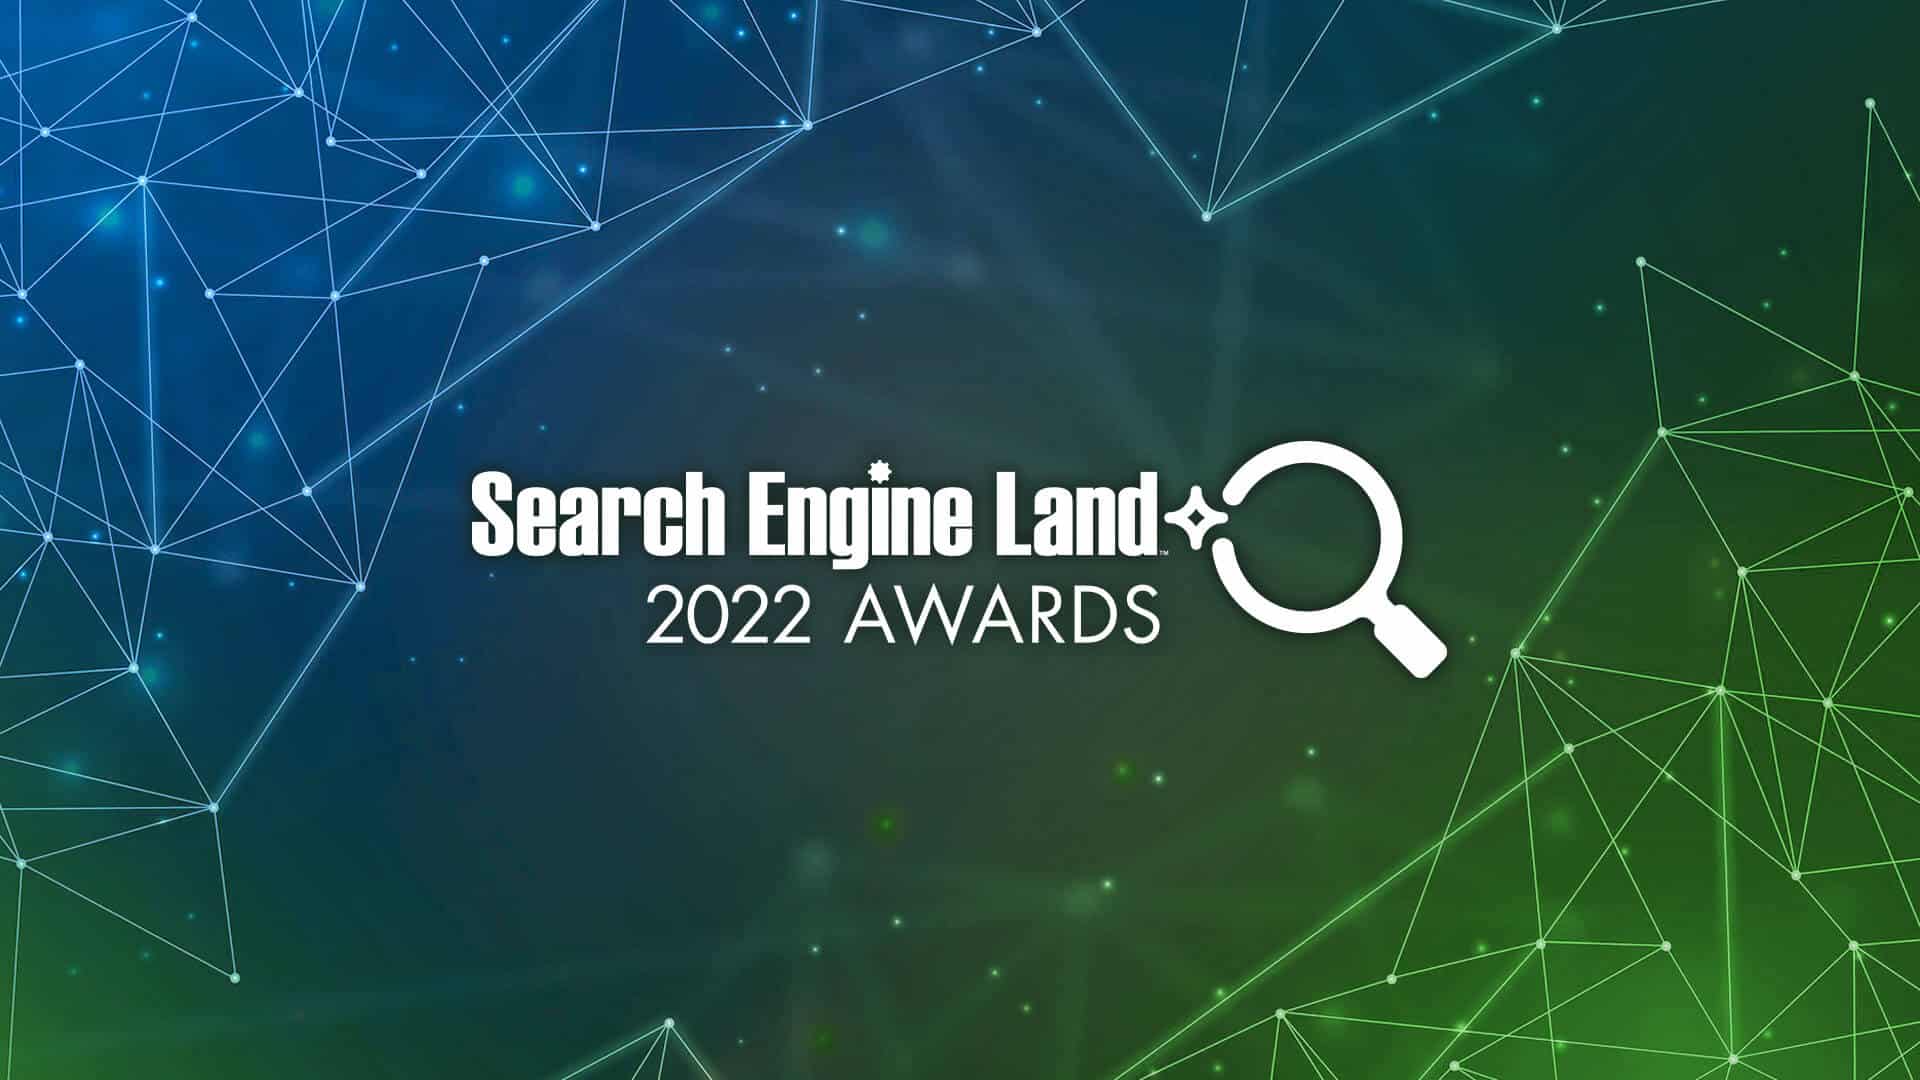 The Search Engine Land Awards The highest honor in search